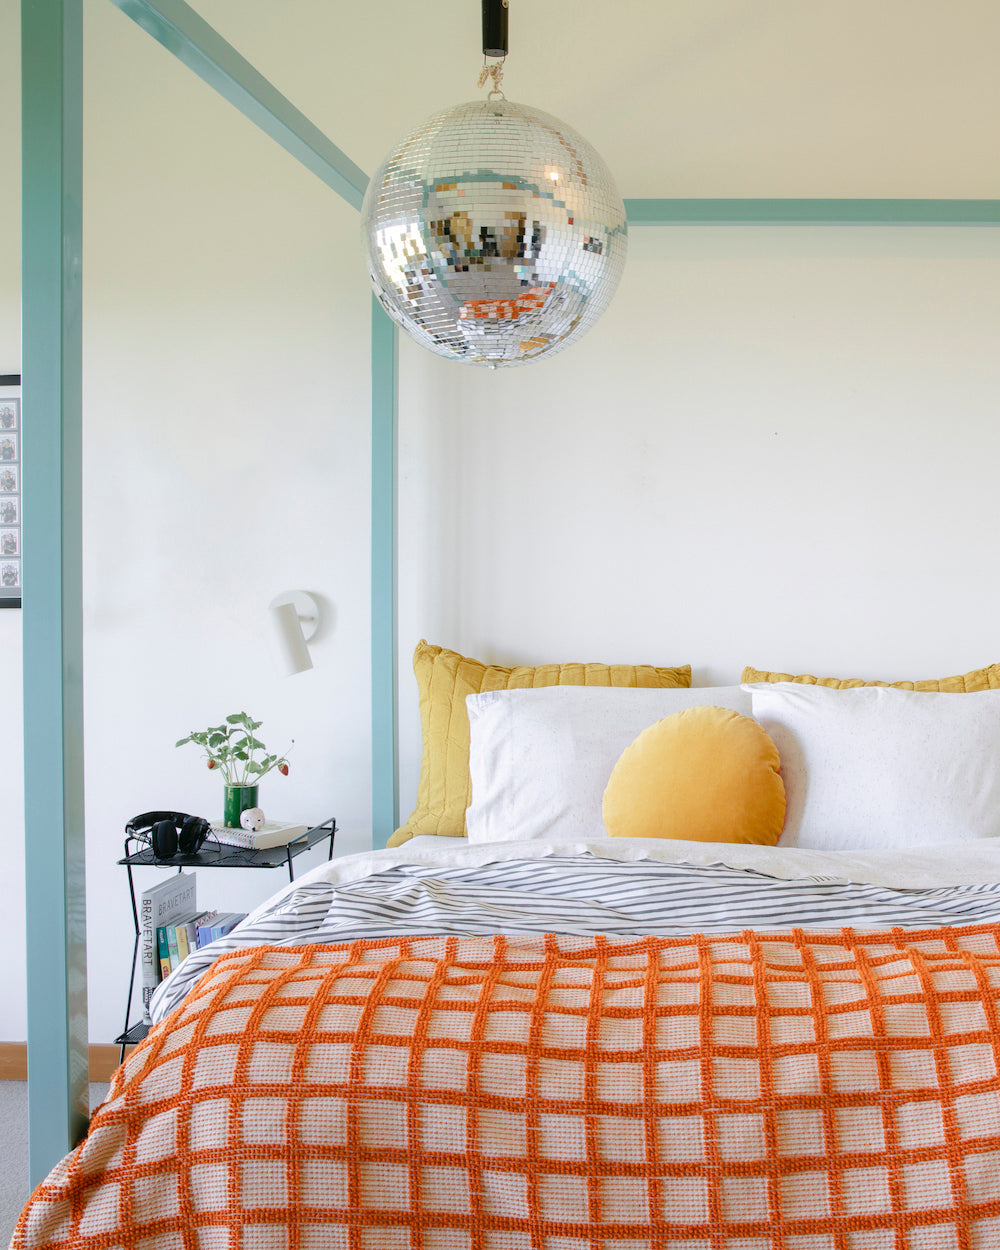 bed with a chandelier above it and a round yellow pillow on the bed and red plaid blanket